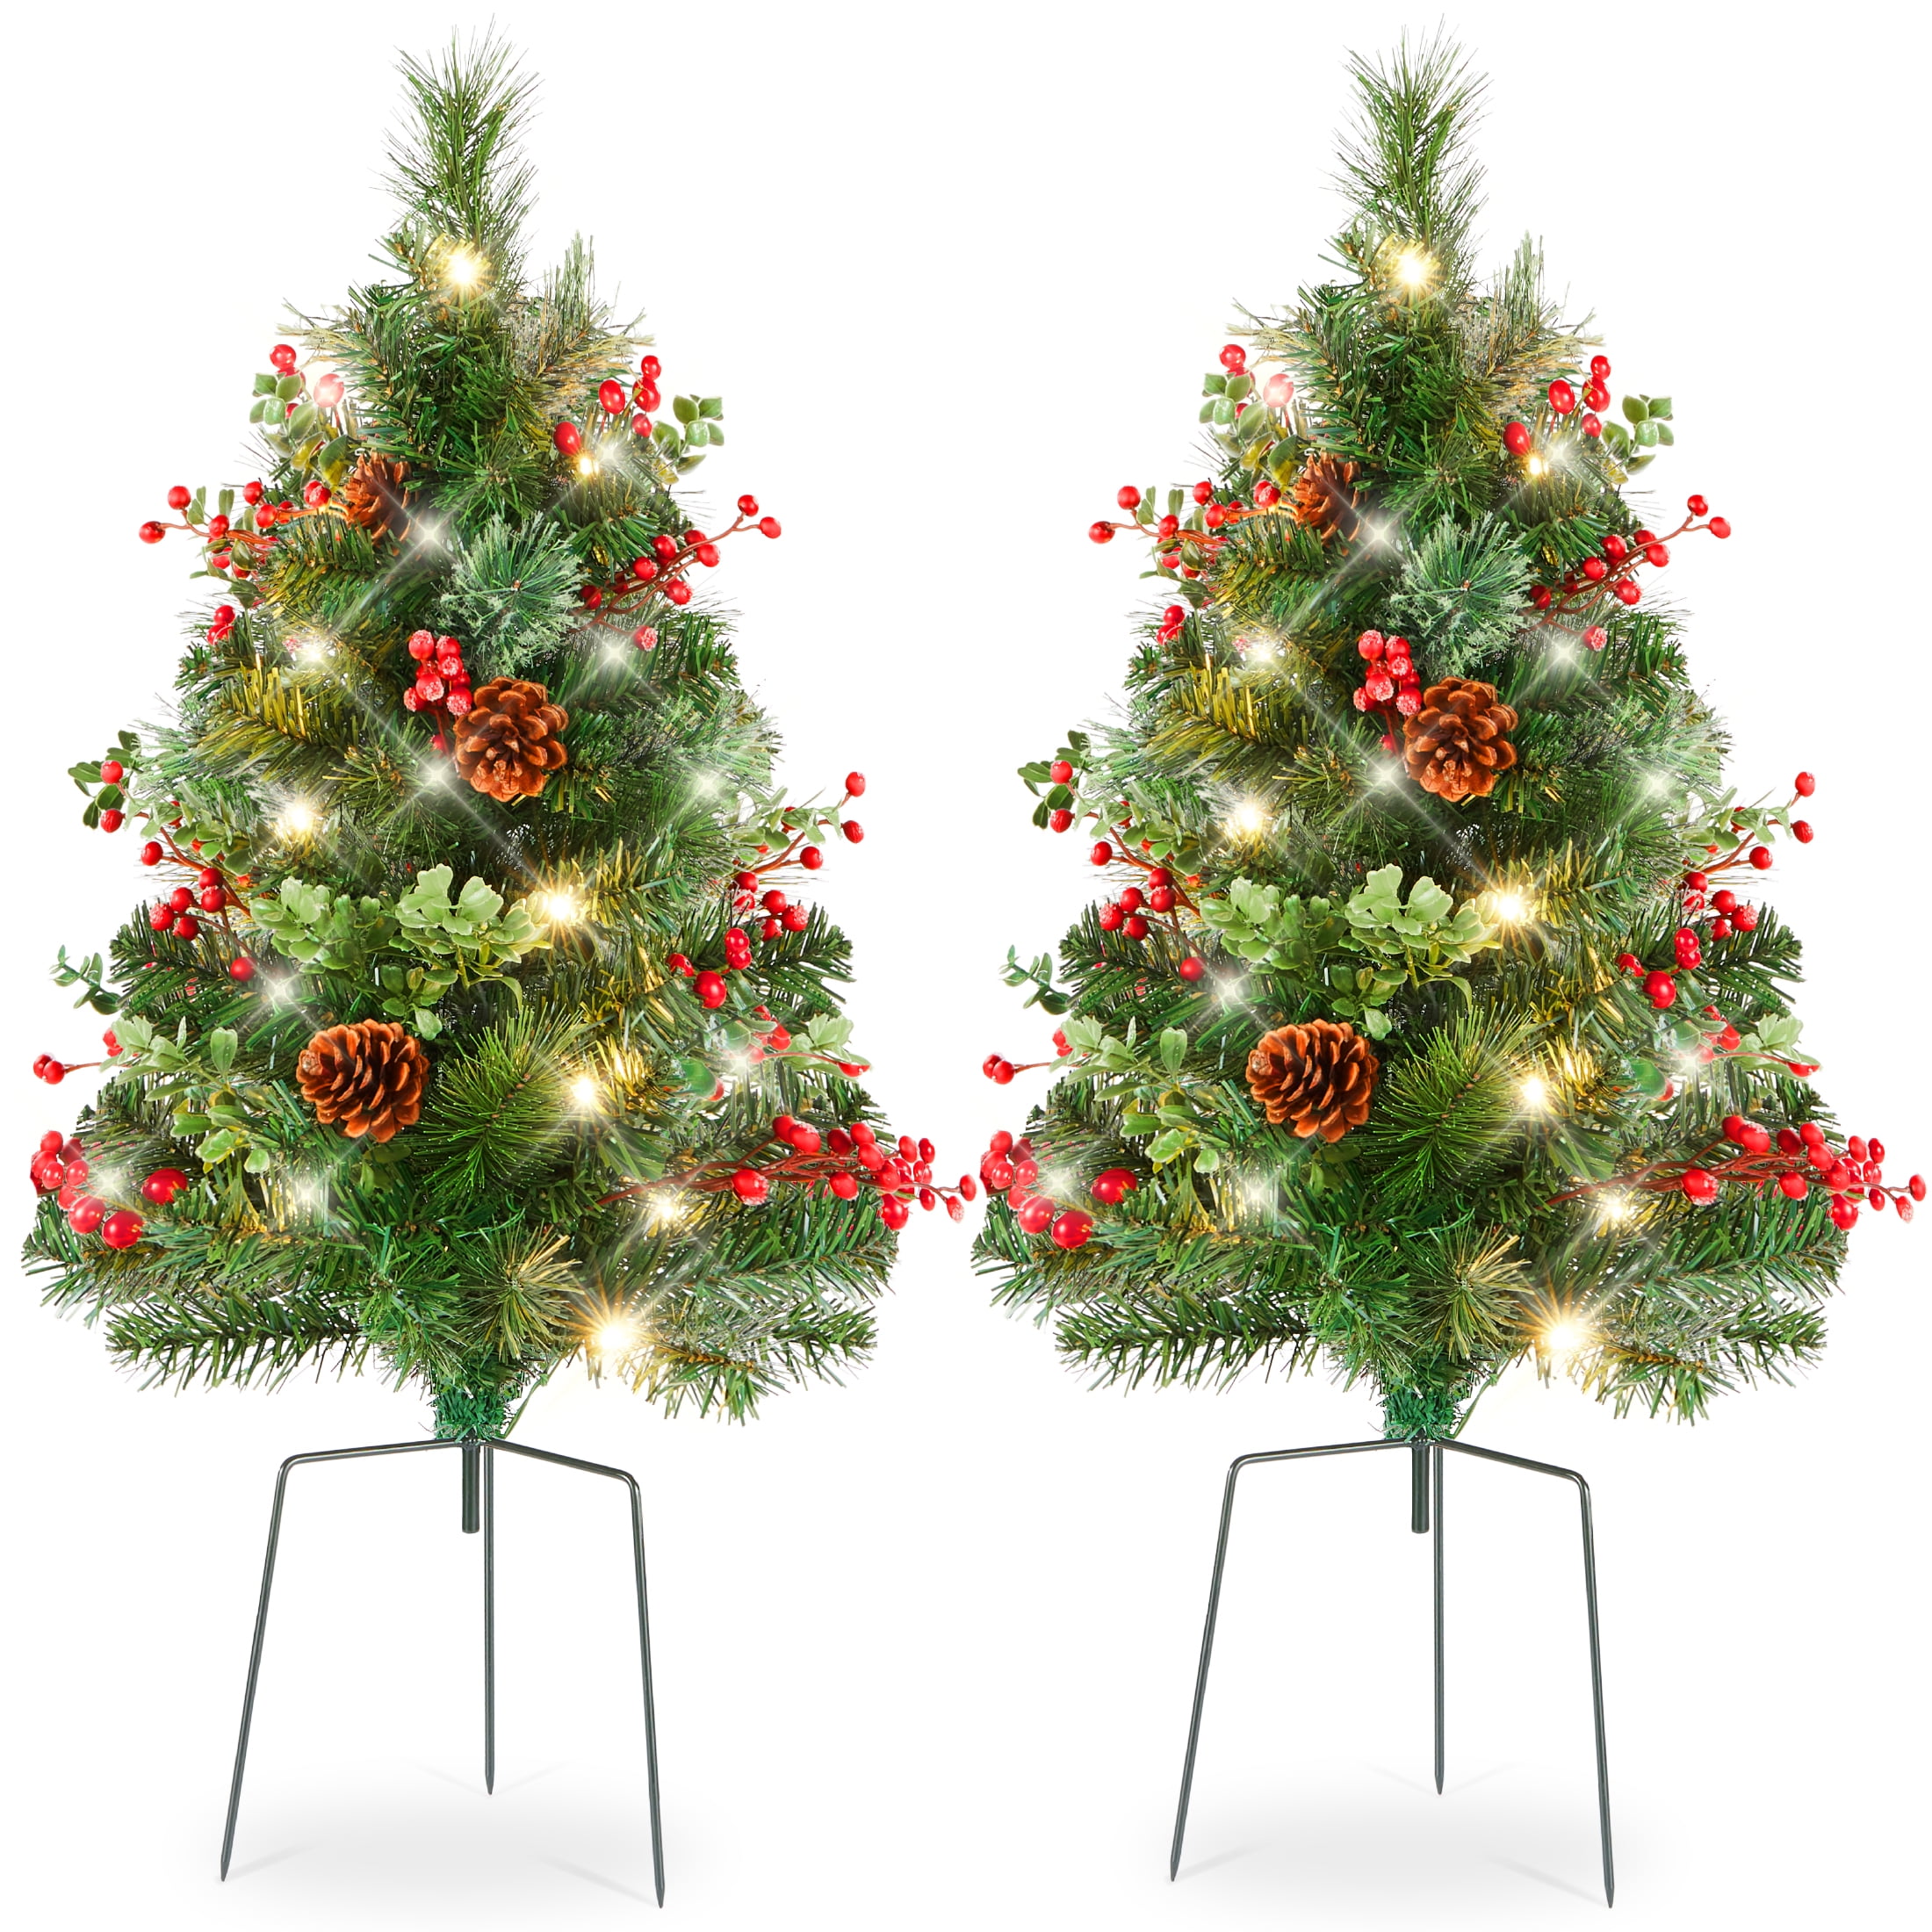 Set Of 2 53 Metal Outdoor Red And Green Christmas Tree Jingle Bell Signs Stake Decorations For Home Lawn Pathway Walkway Driveway Weather Resistant Xmas Decoration Christmas Yard Garden Stakes Decor